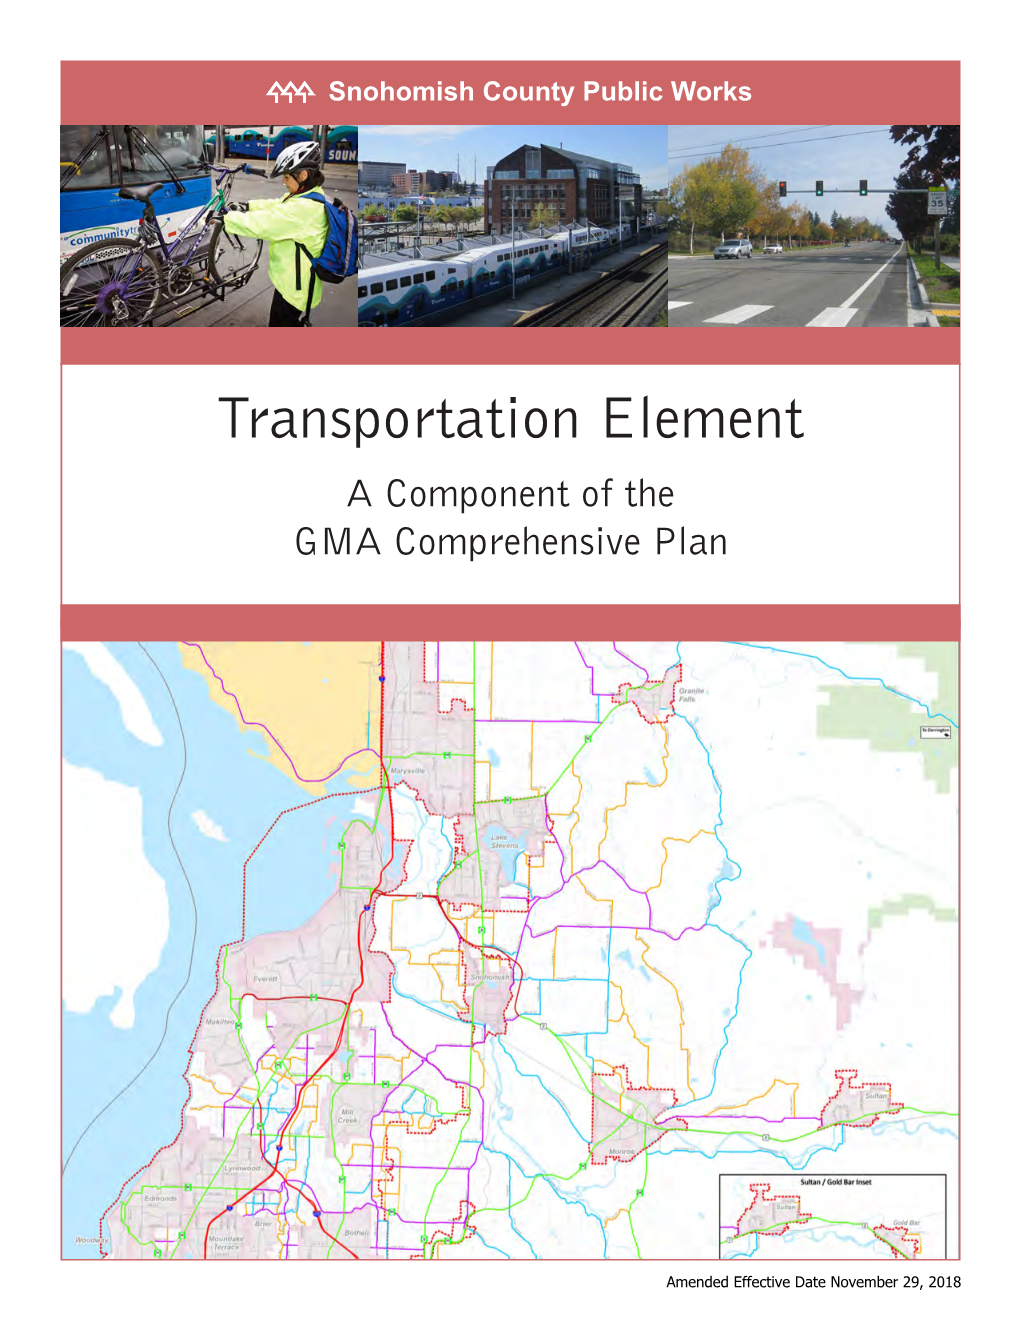 Transportation Element: a Component of the GMA Comprehensive Plan